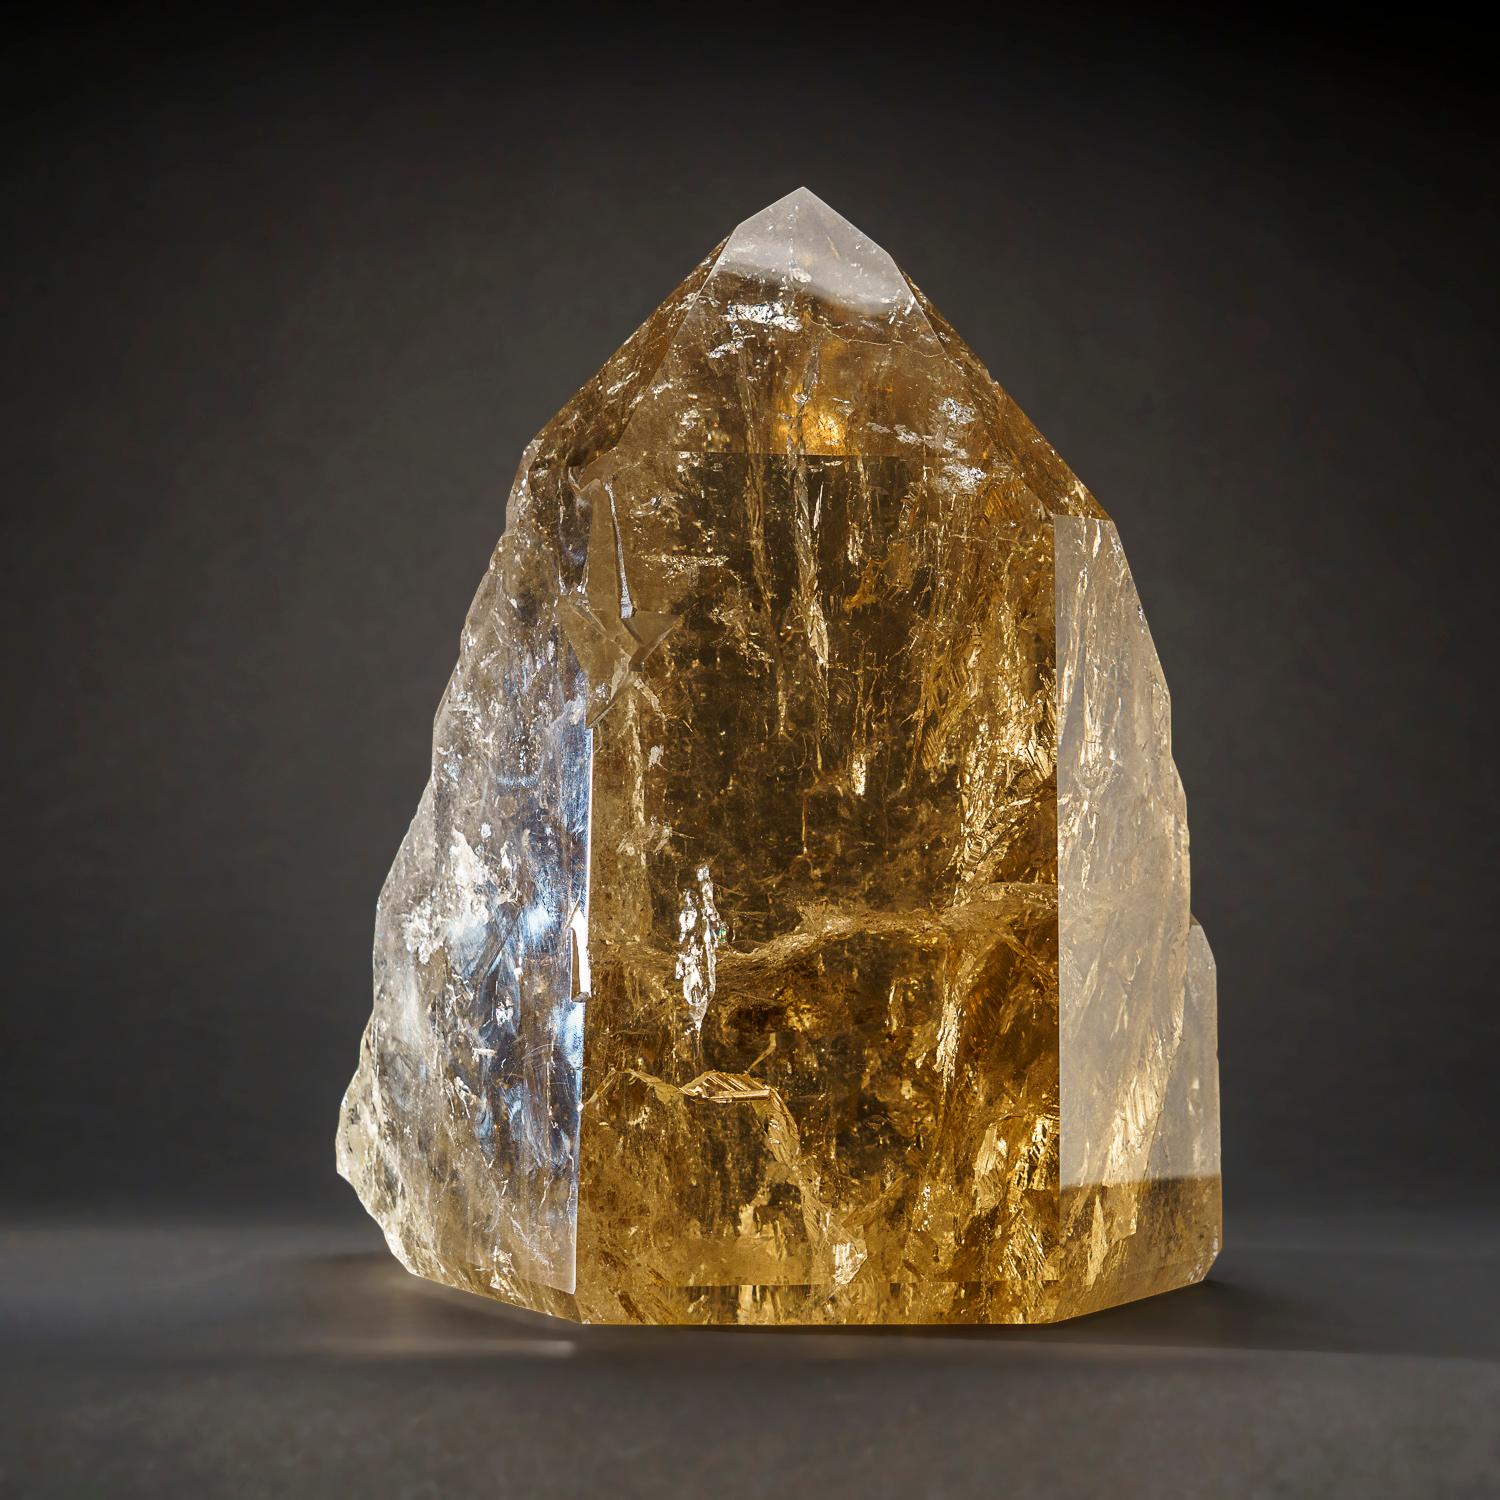 Contemporary Genuine Large Cathedral Smoky Quartz Crystal Point From Brazil (29 lbs) For Sale